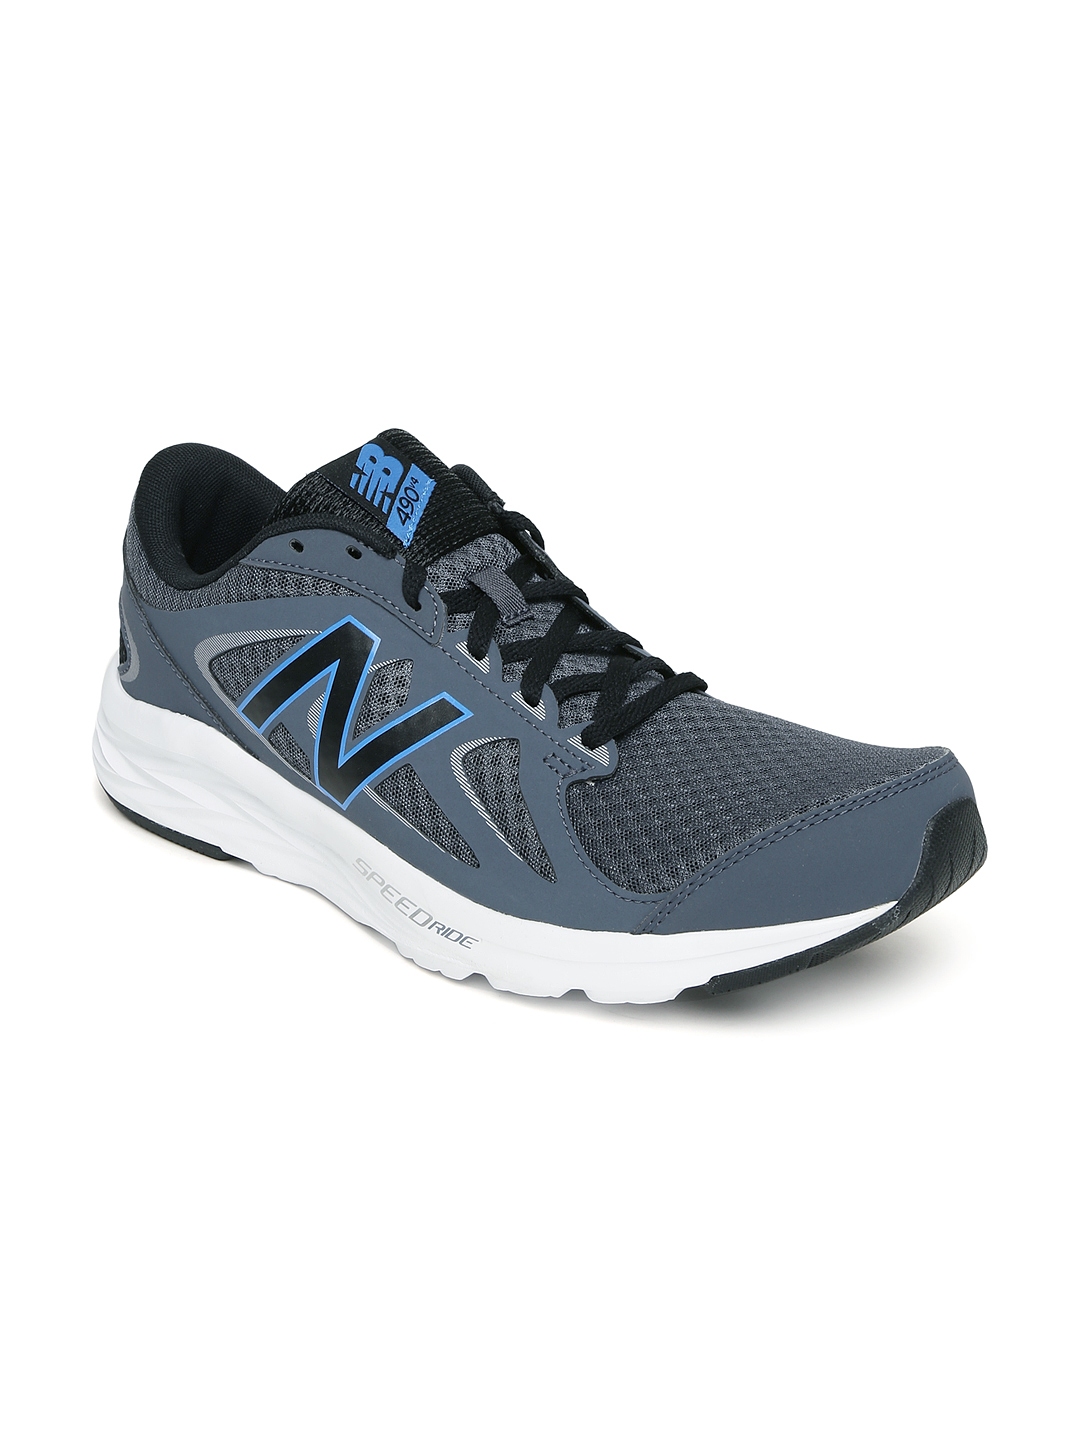 Buy New Balance Men Charcoal Grey 490 Running Shoes - Sports Shoes for ...